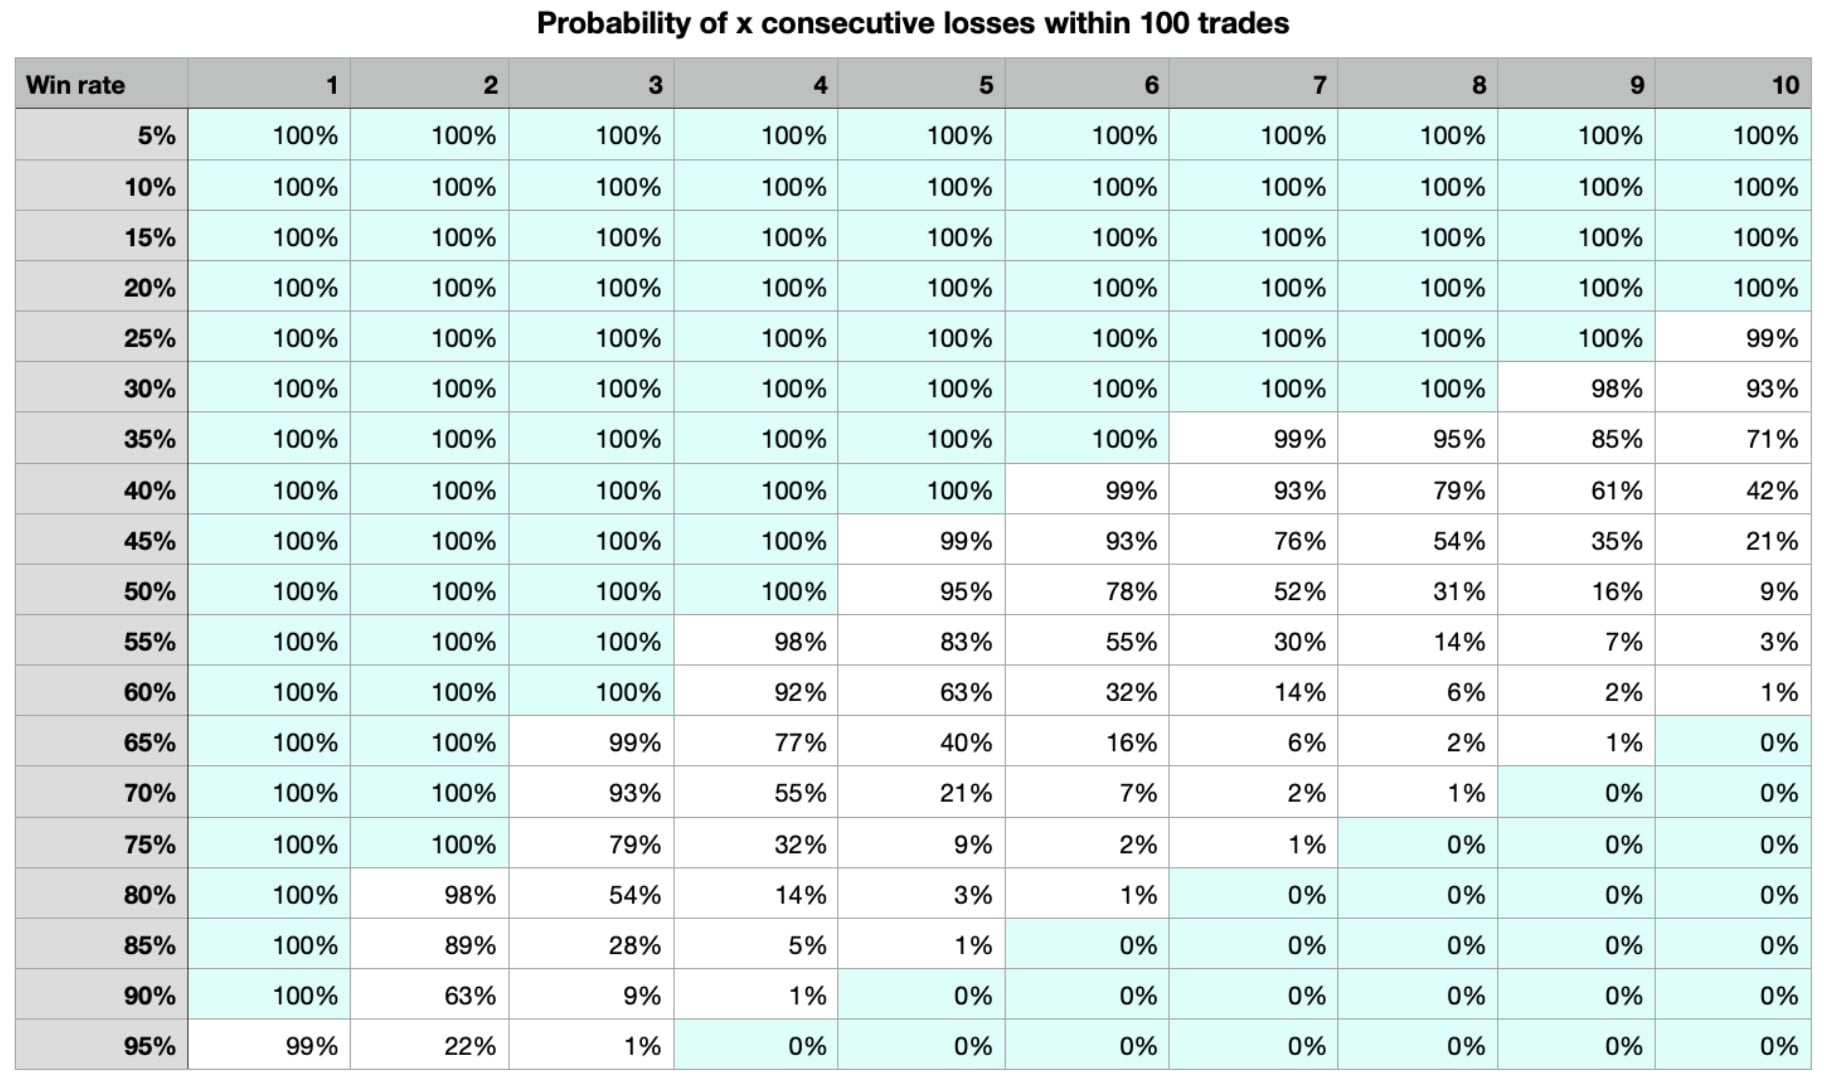 Probability of X consecutive losses within 100 trades